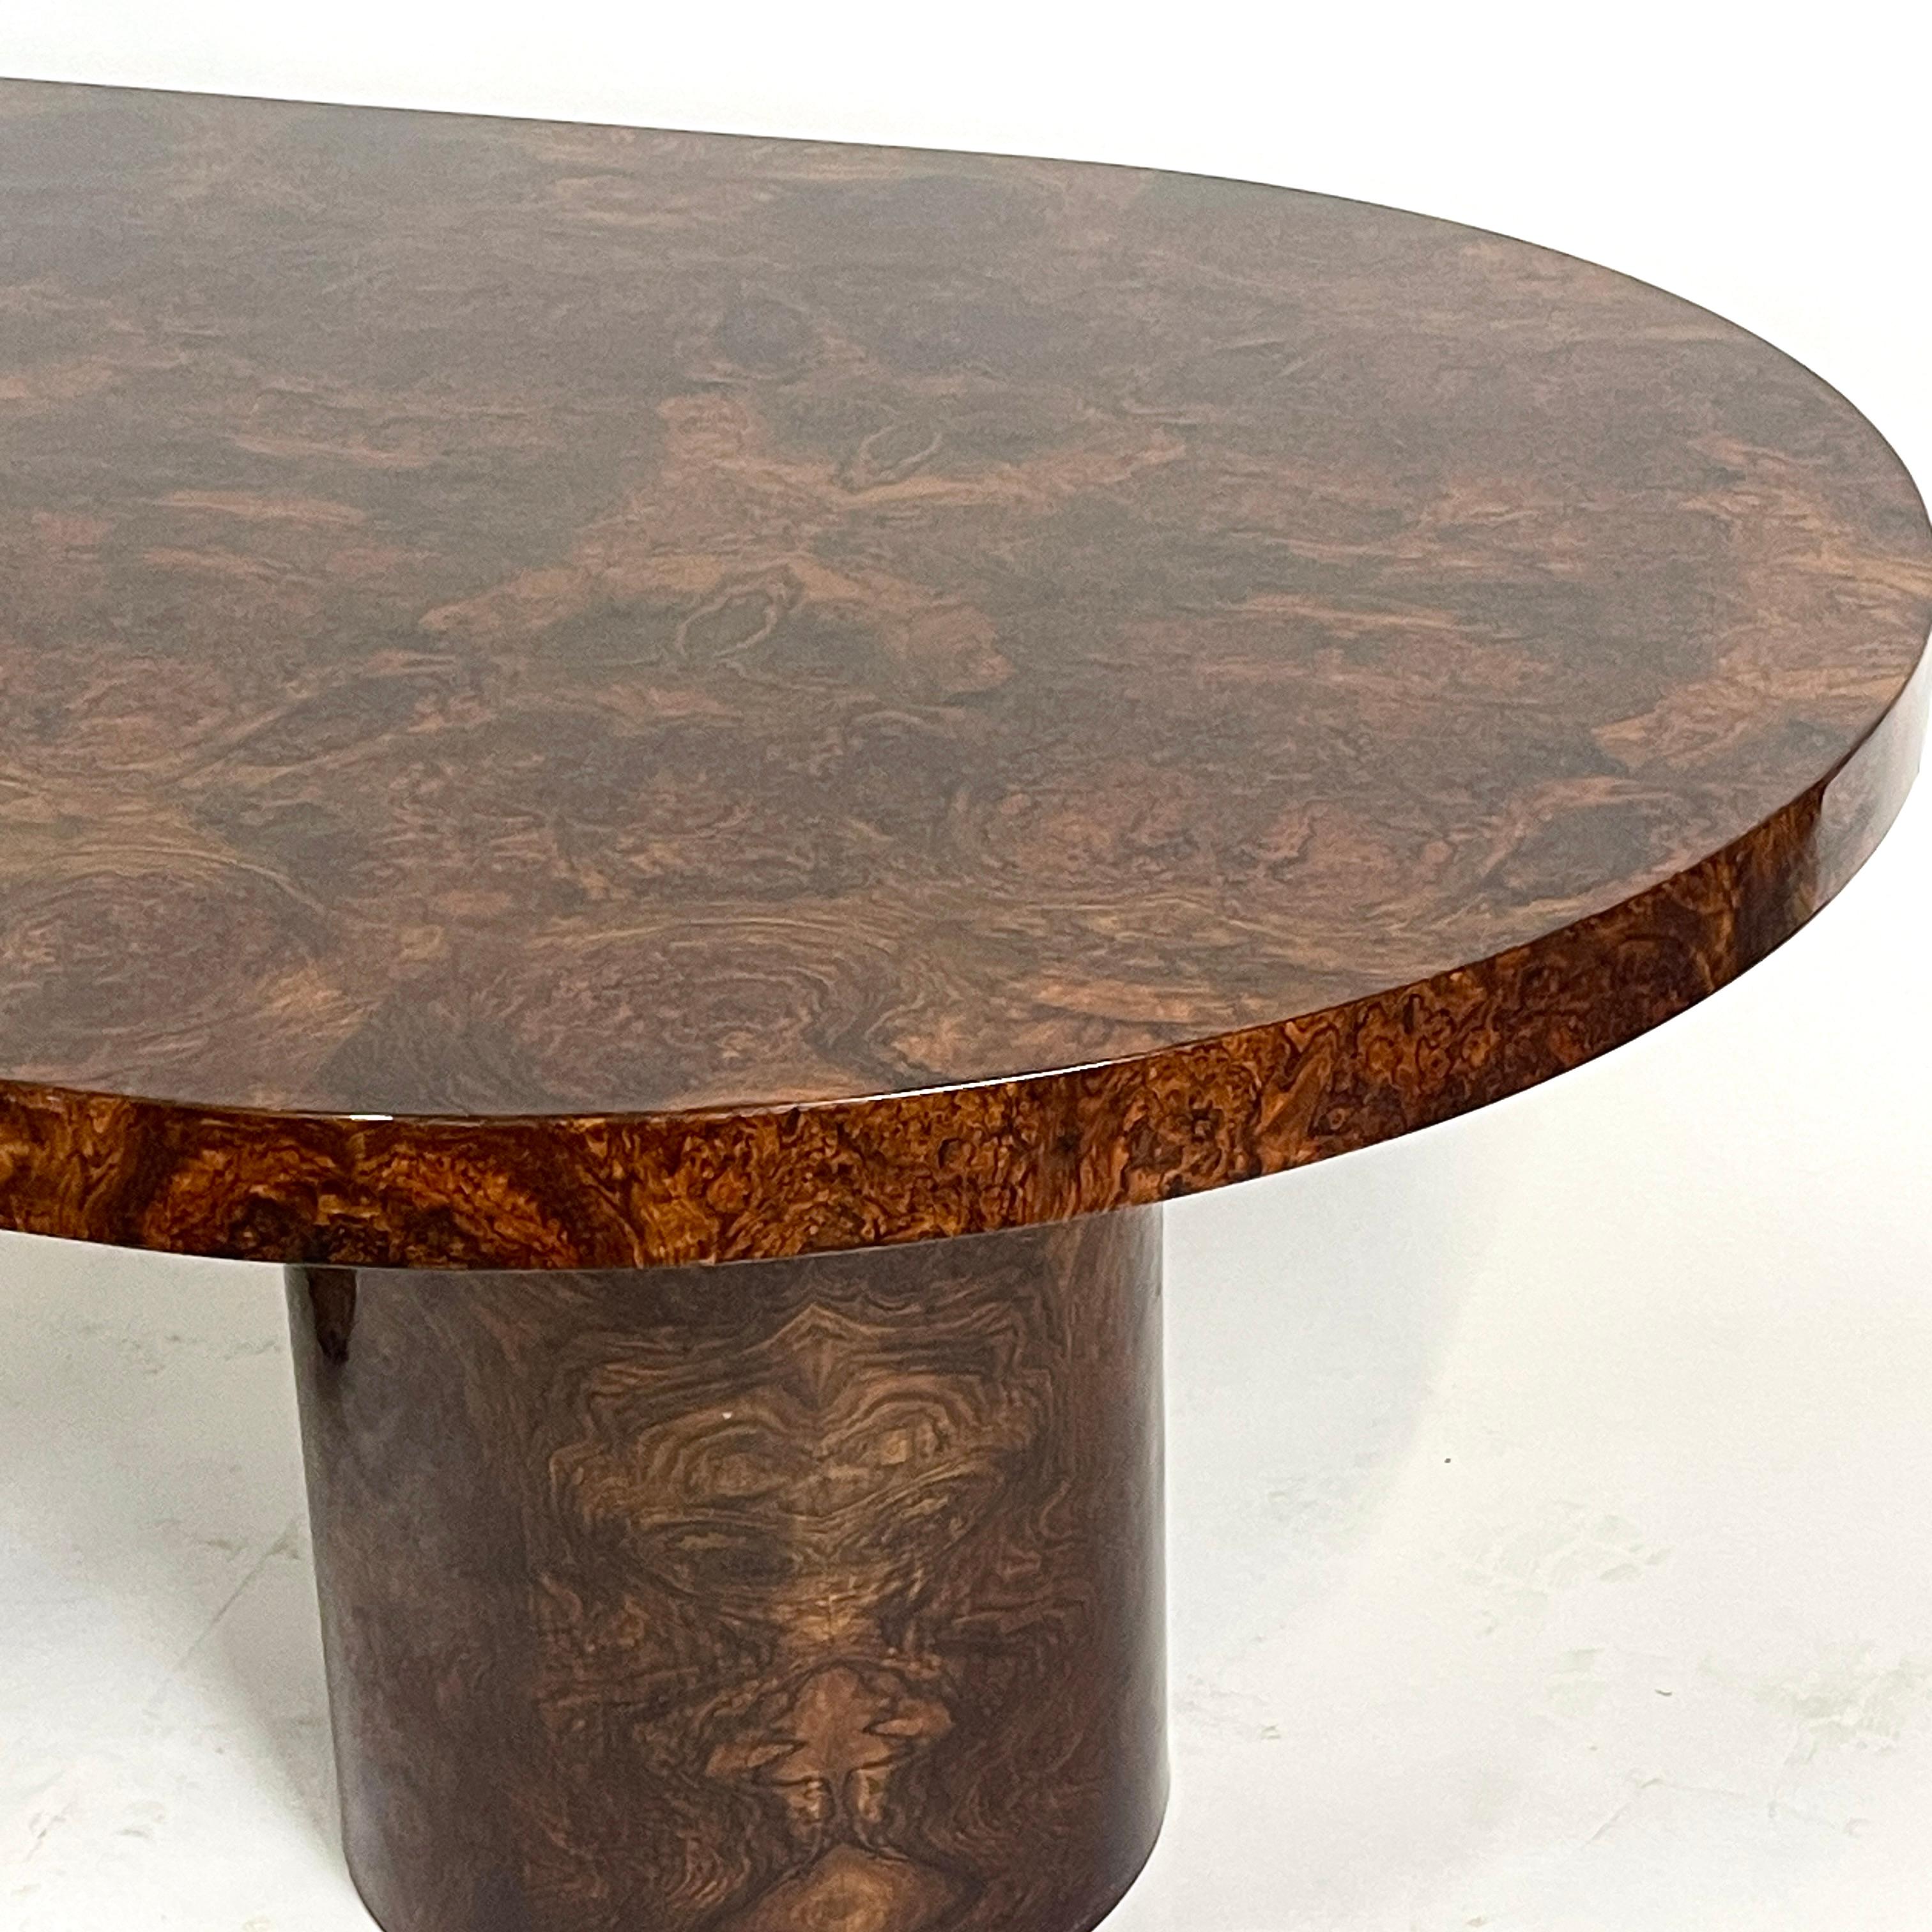 Lacquered Burled Mahogany Oval Dining Table by Paul Mayen for Intrex Habitat 4